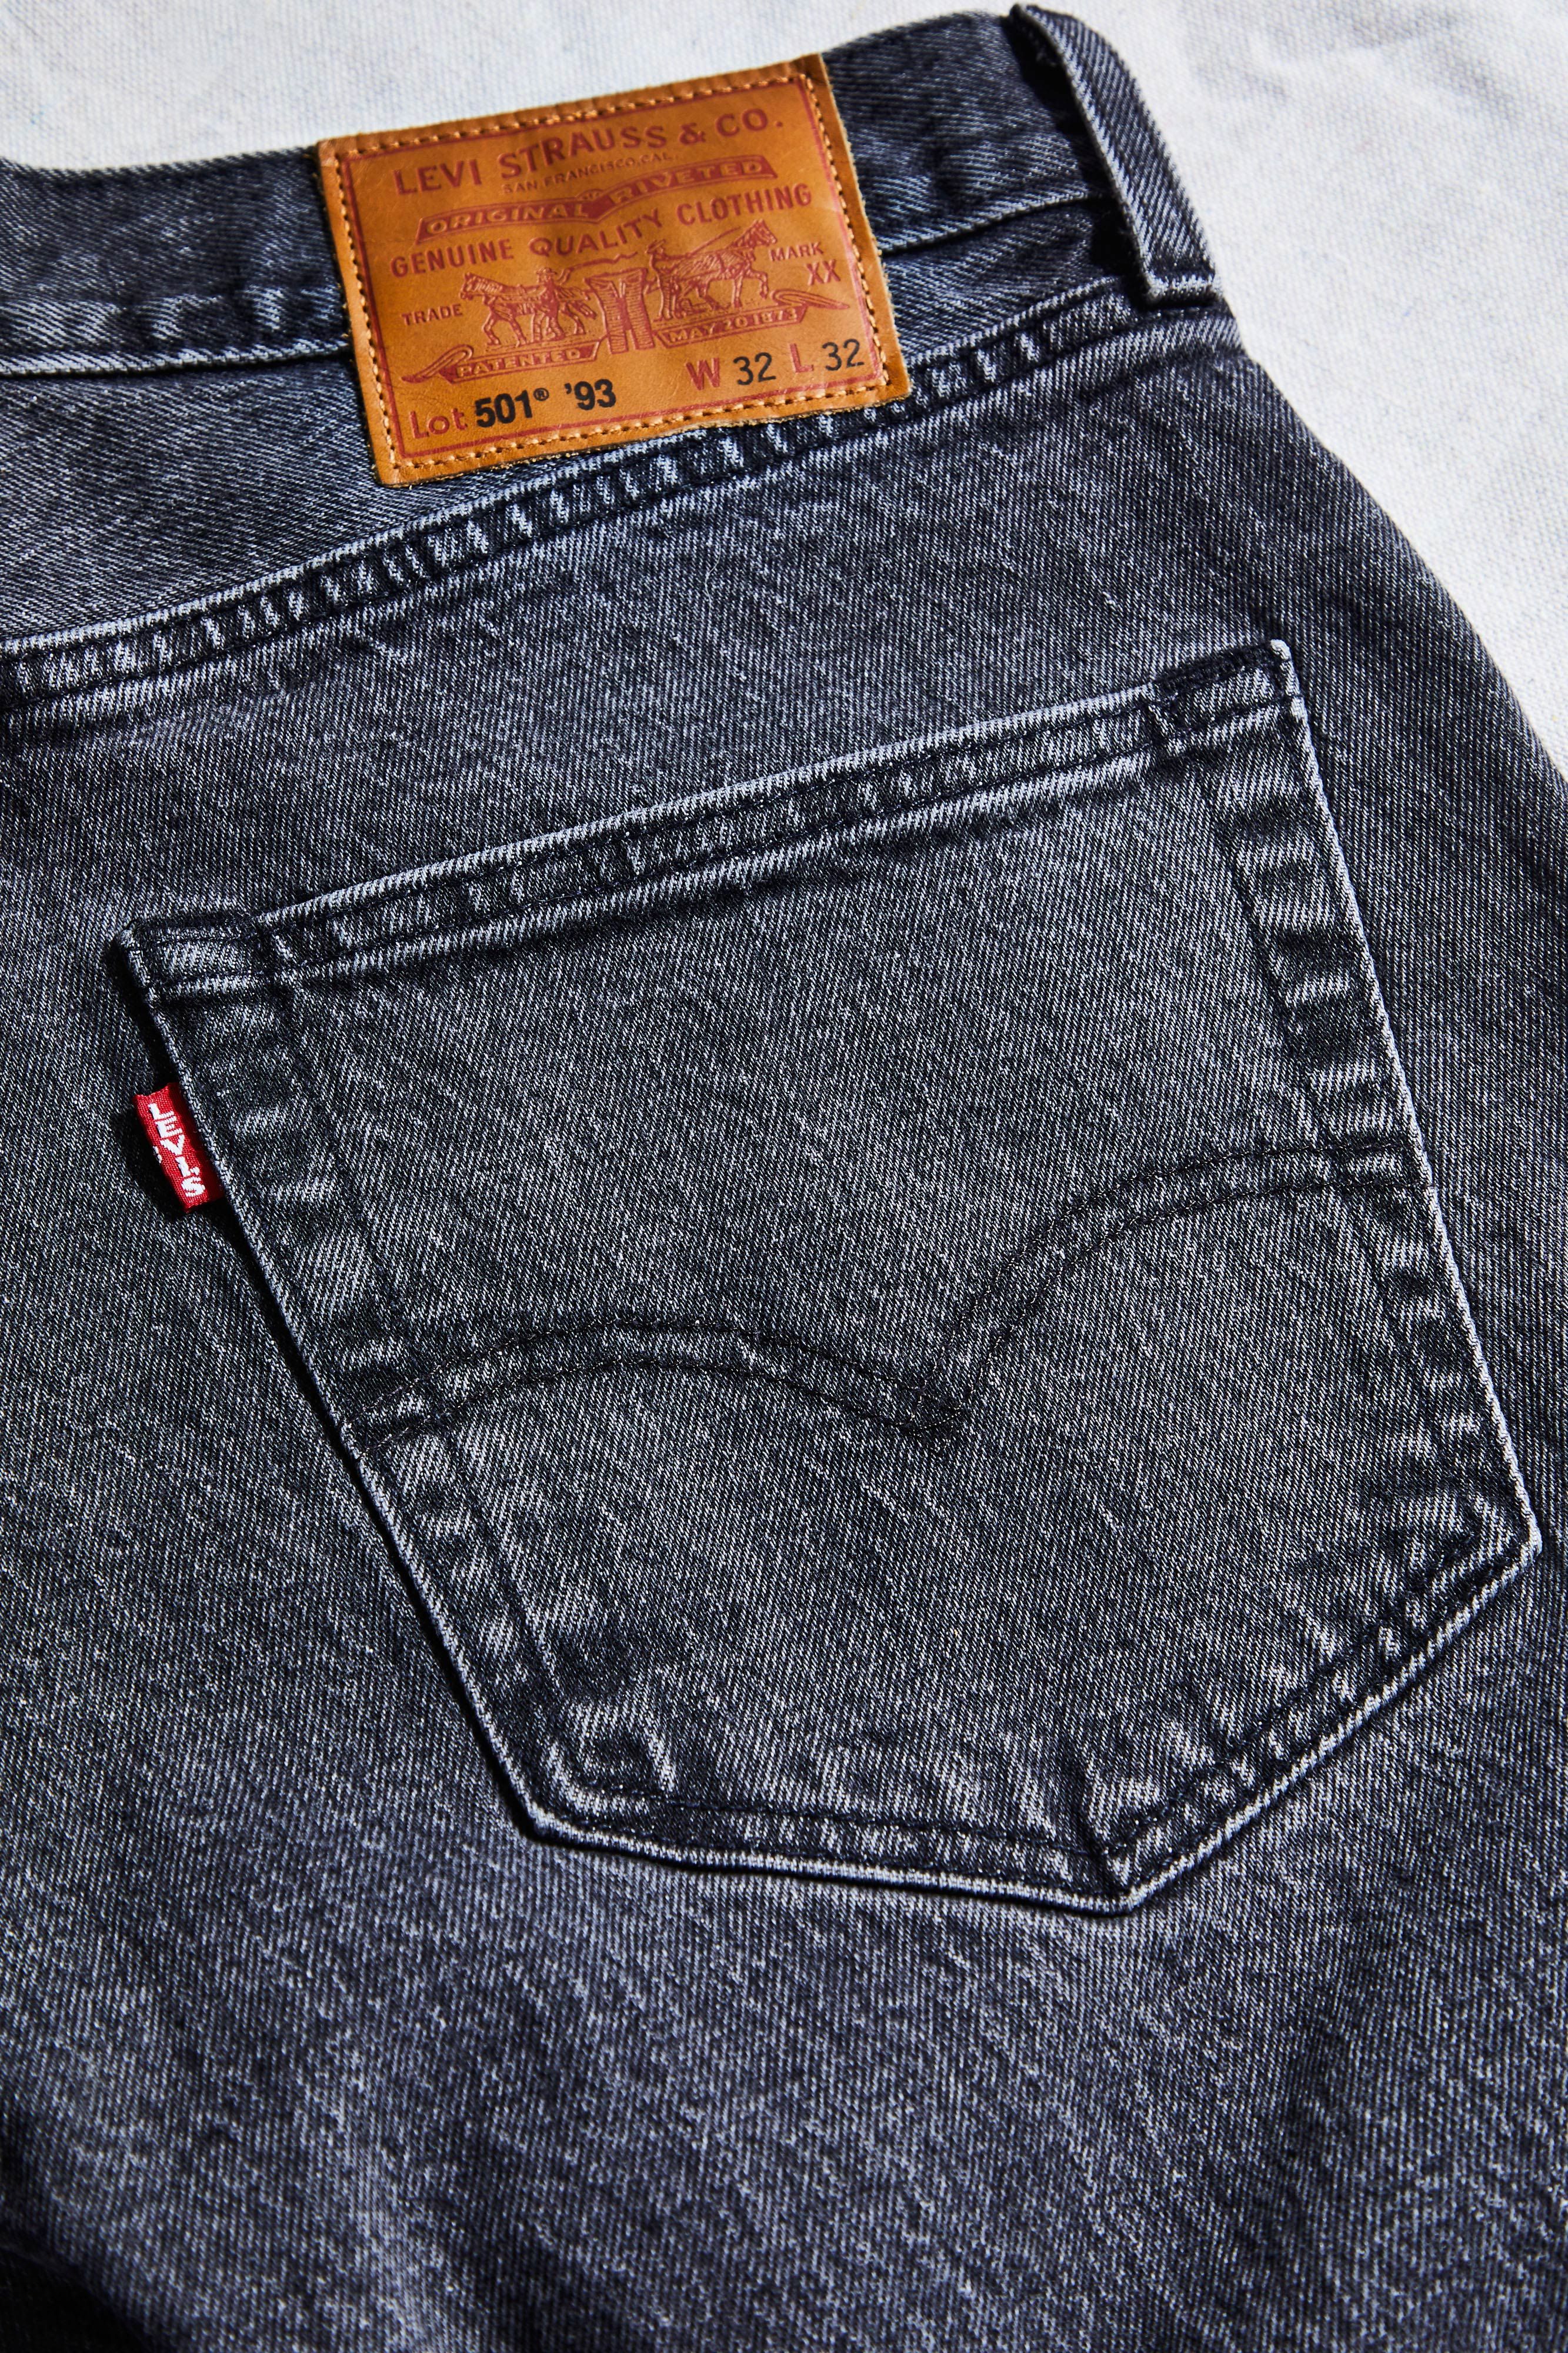 Levi's 501 '93 Jeans Review and Endorsement